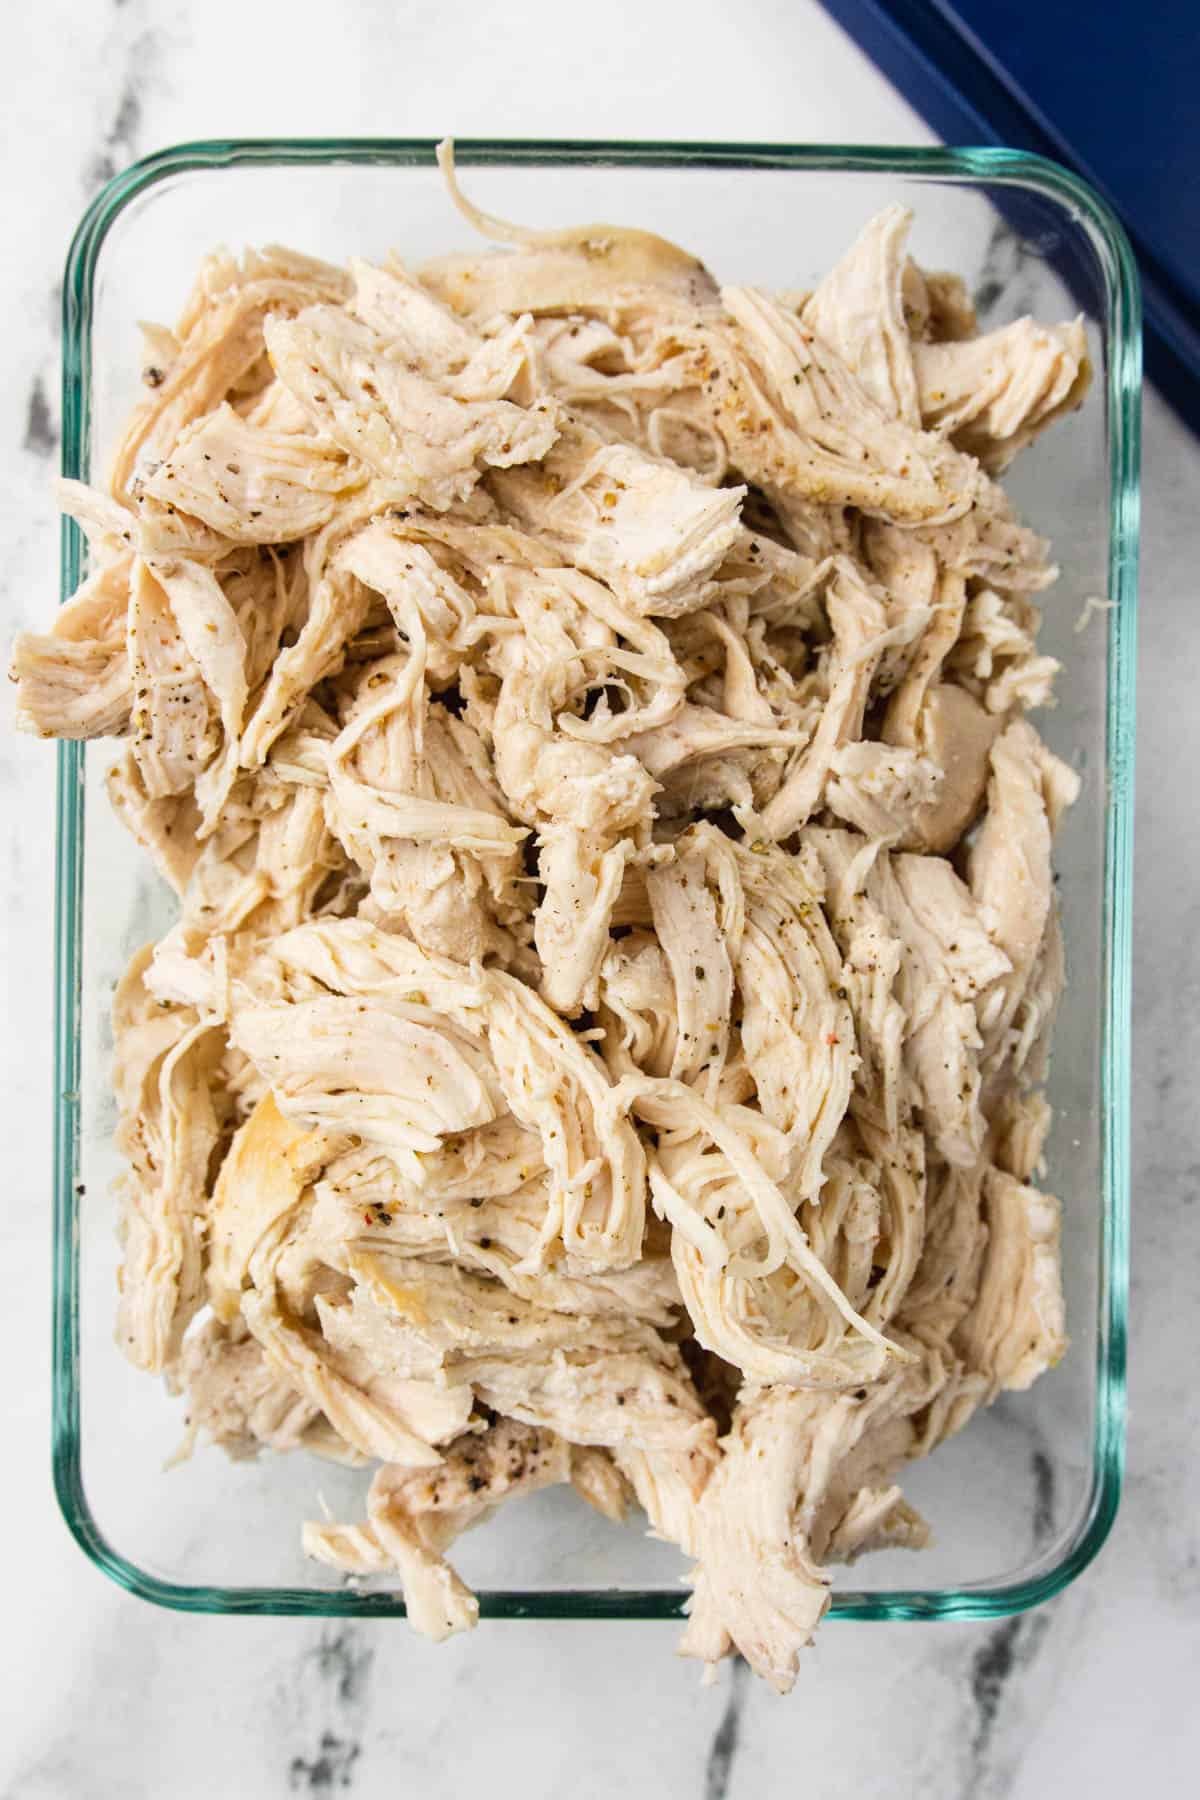 shredded chicken in a glass container